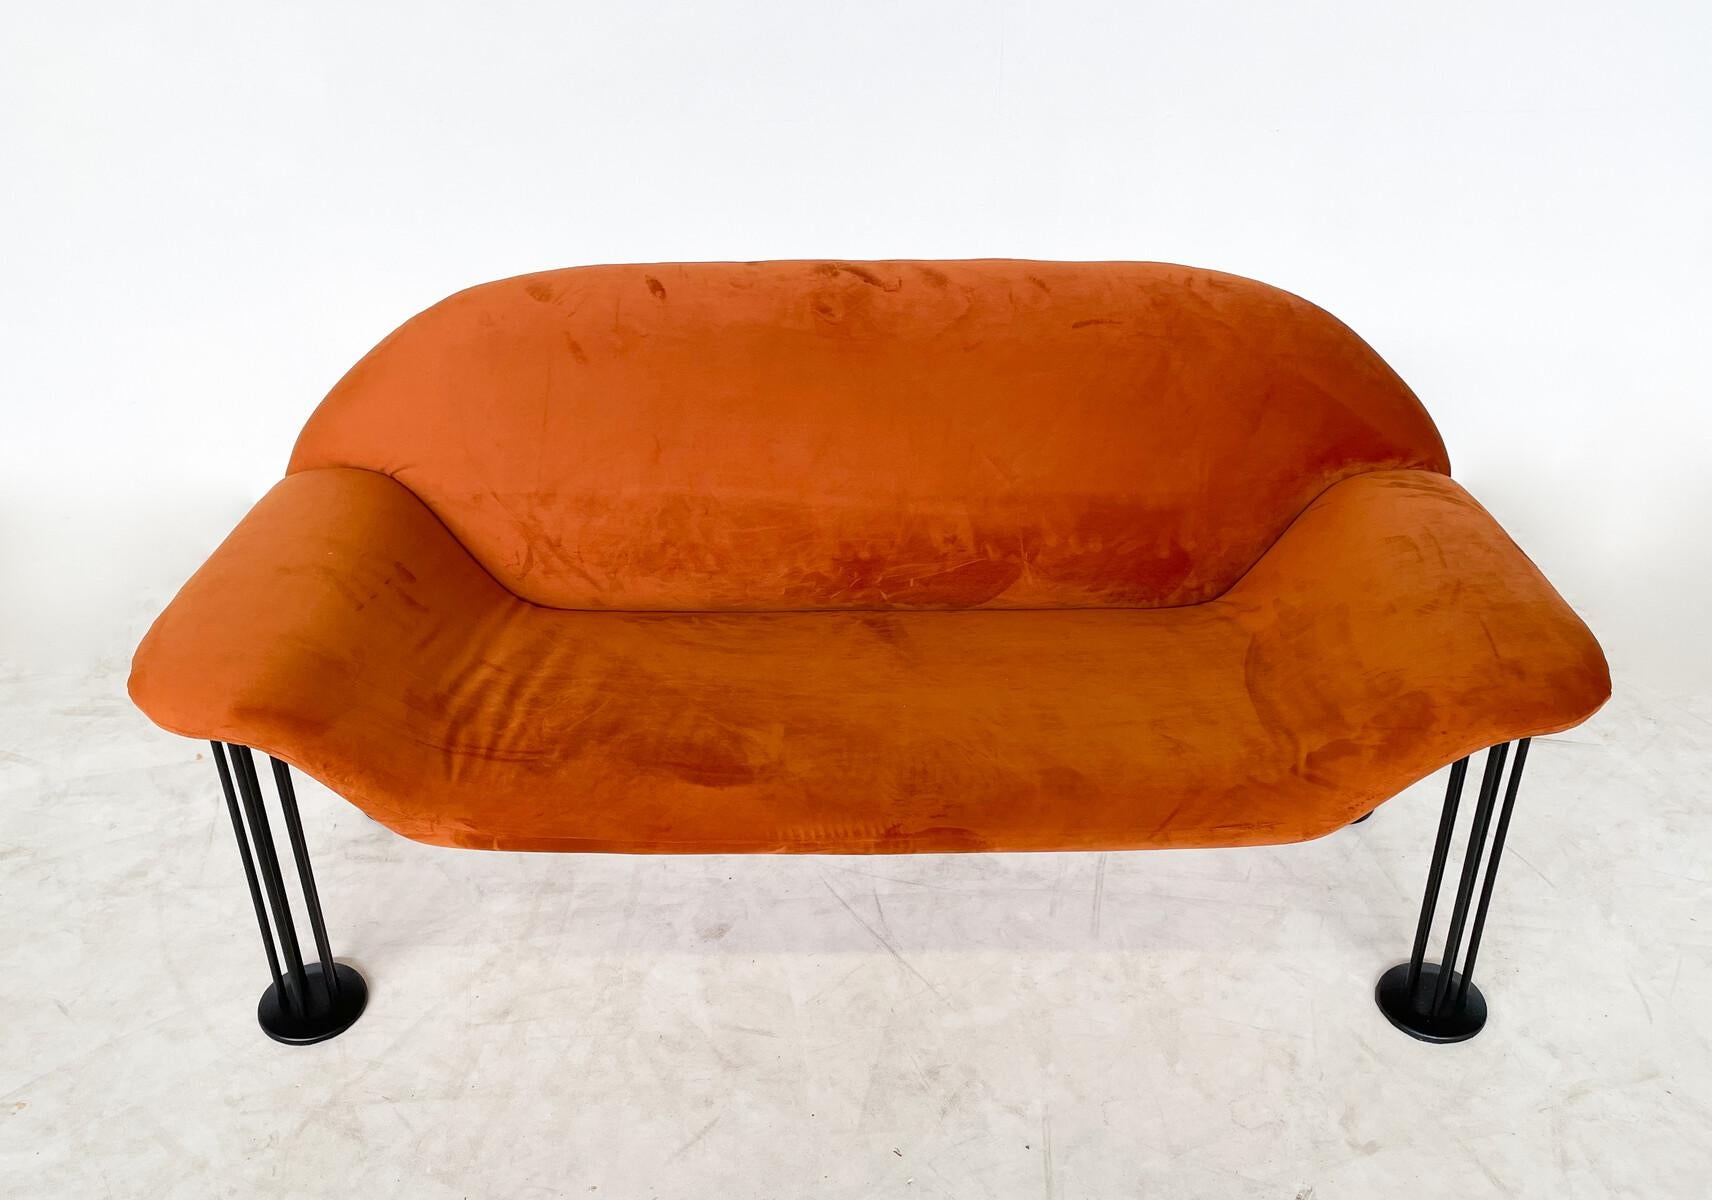 Late 20th Century Mid-Century Modern Orange Sofa by Burkhard Vogtherr for Hain + Tohme For Sale